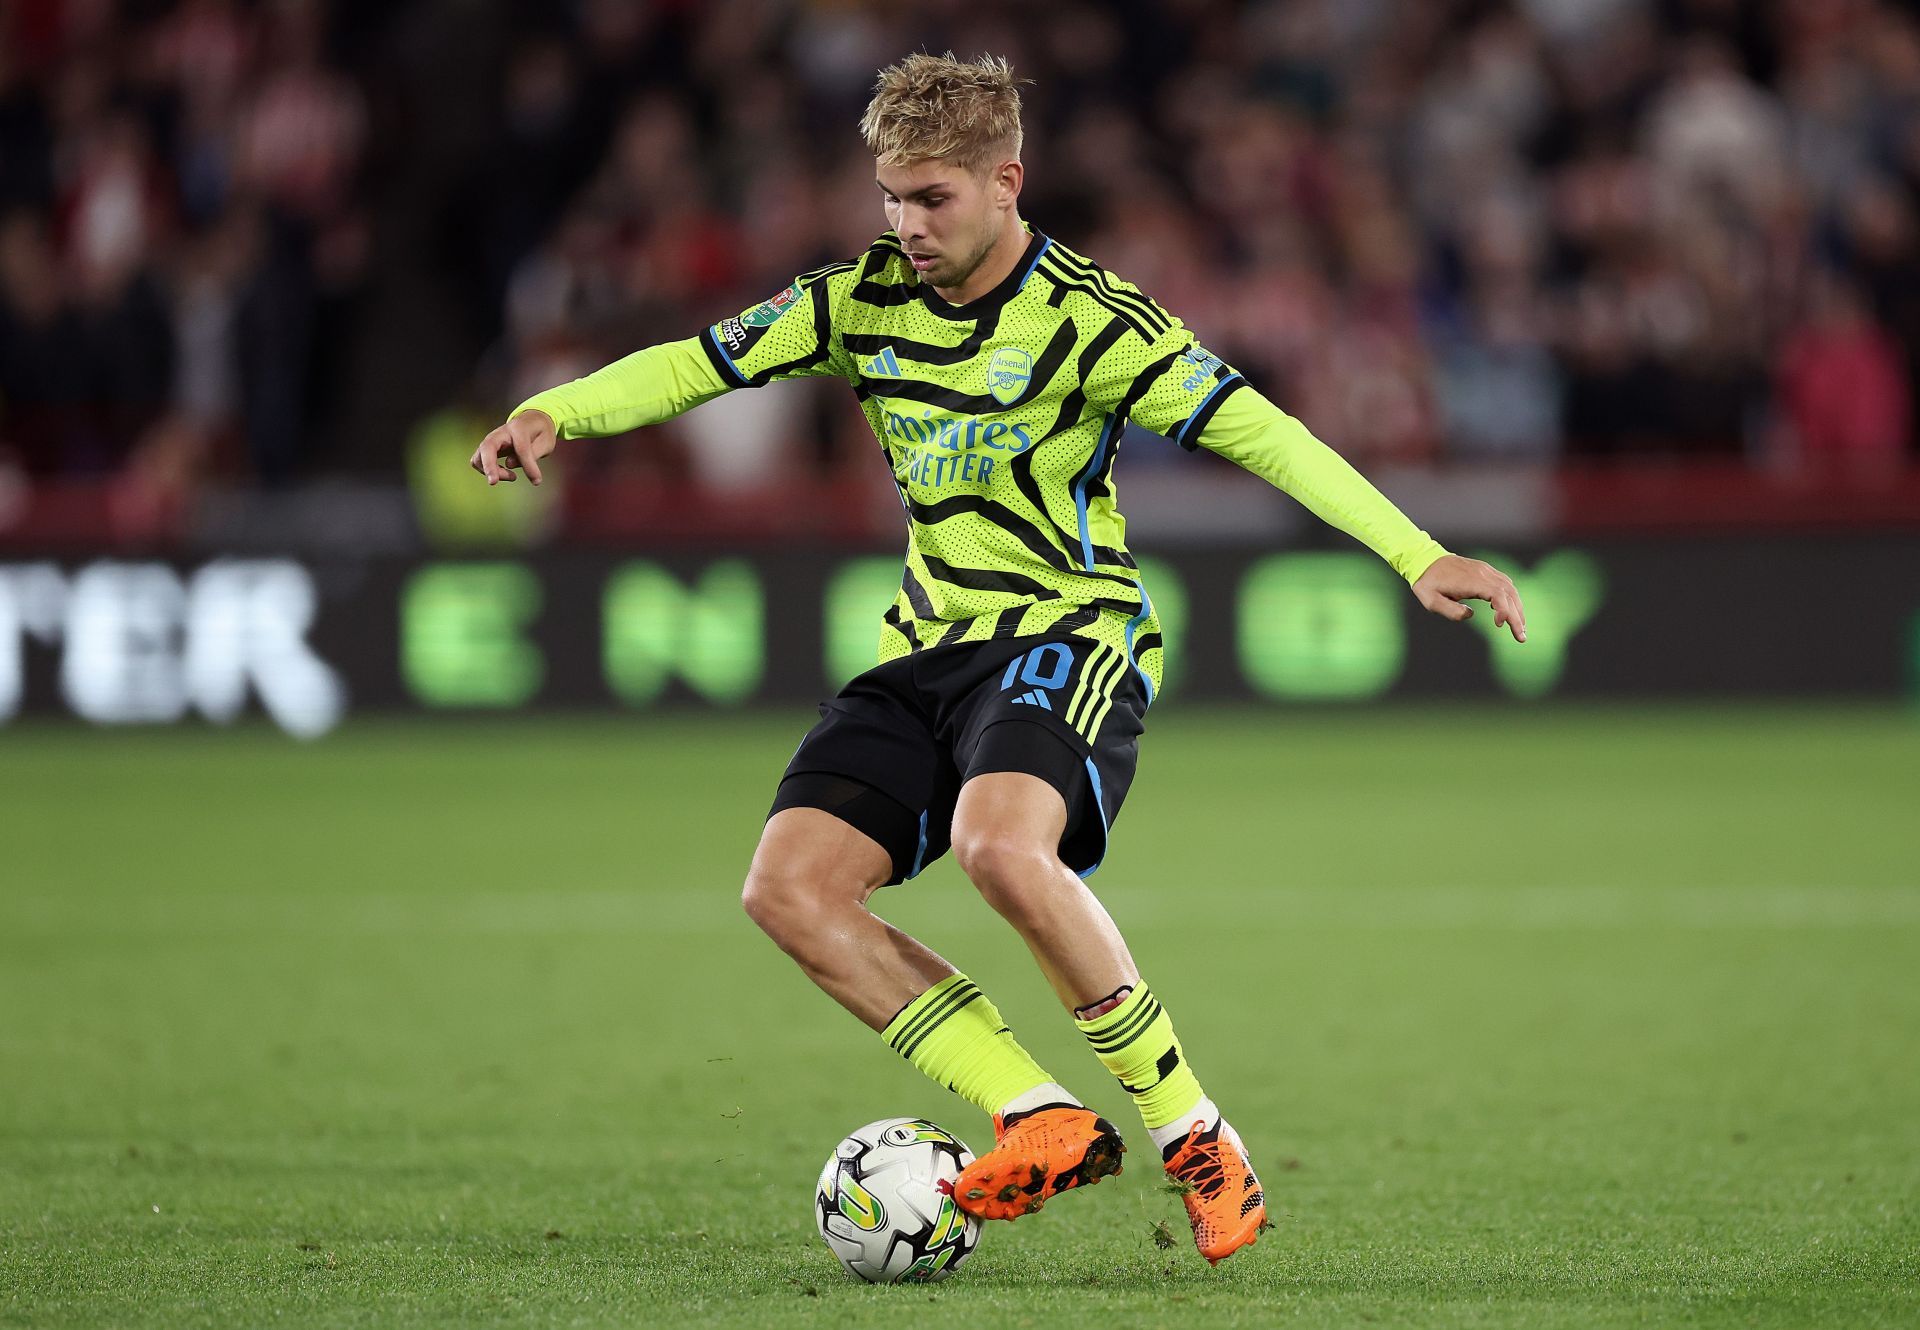 Smith Rowe made a rare start against Nottingham Forest.